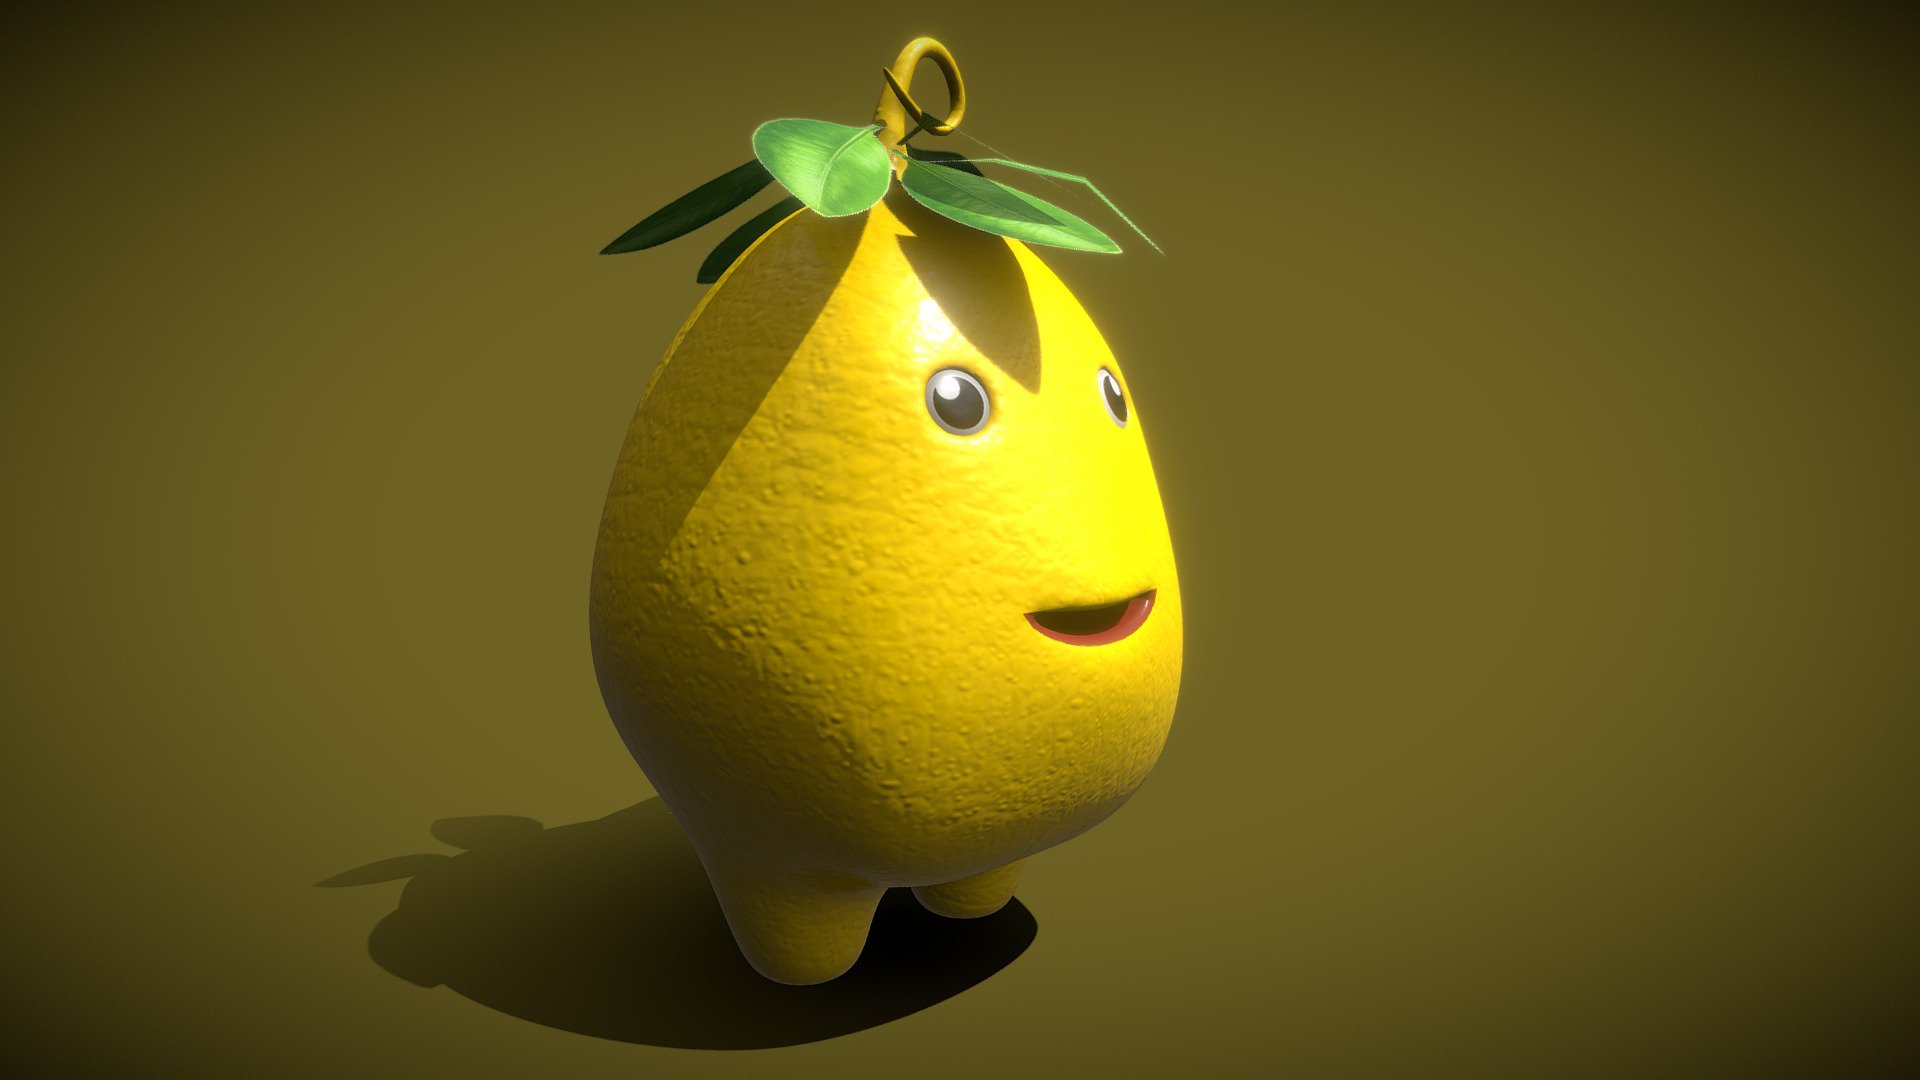 This high-quality 3D model portrays a realistic representation of a lemon, a vibrant and zesty citrus fruit. The model accurately captures the physical characteristics and features of a typical lemon.

From its rounded shape to its slightly pointed ends, this 3D model captures the essence of a fresh and ripe lemon. The textures and materials are carefully set up to ensure a realistic representation when rendered or viewed in real-time applications.

Whether you need it for culinary visualizations, still life compositions, or any other creative project, this 3D model of a lemon will help you accurately visualize and showcase the fruit in a virtual environment.

Note: Please remember to respect intellectual property rights and ensure you have the necessary permissions to use and distribute any 3D models or designs based on copyrighted products, including natural objects like lemons 3d model